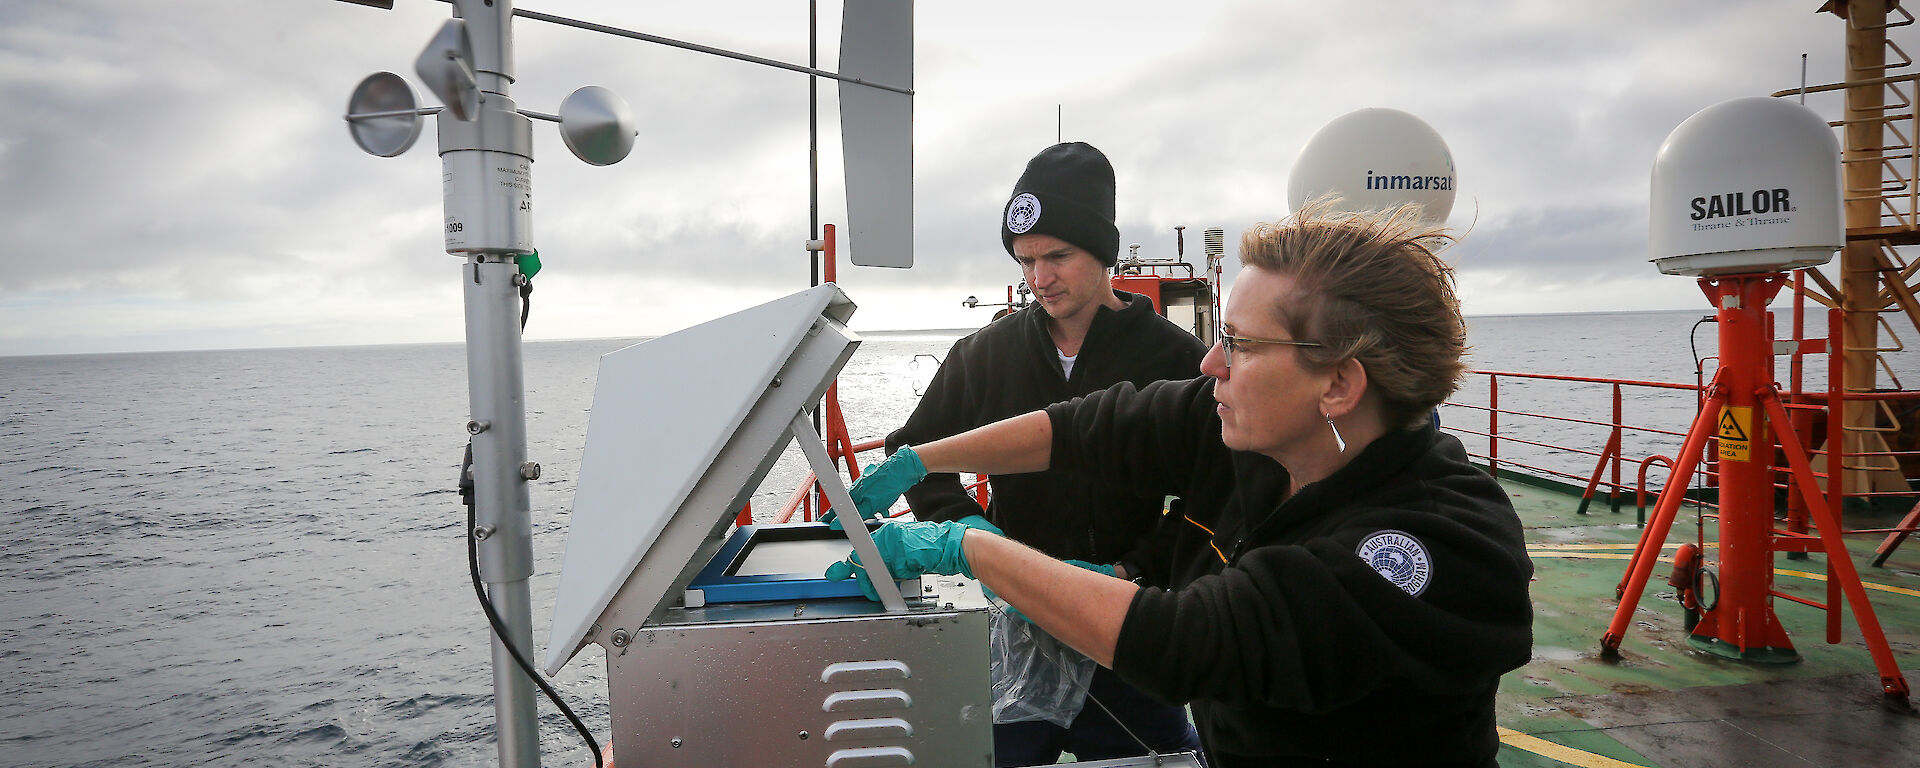 Dr Alan Griffiths of ANSTO, and Professor Clare Murphy of the University of Wollongong, changing a filter on a high volume air sampler on the deck of the Aurora Australis.